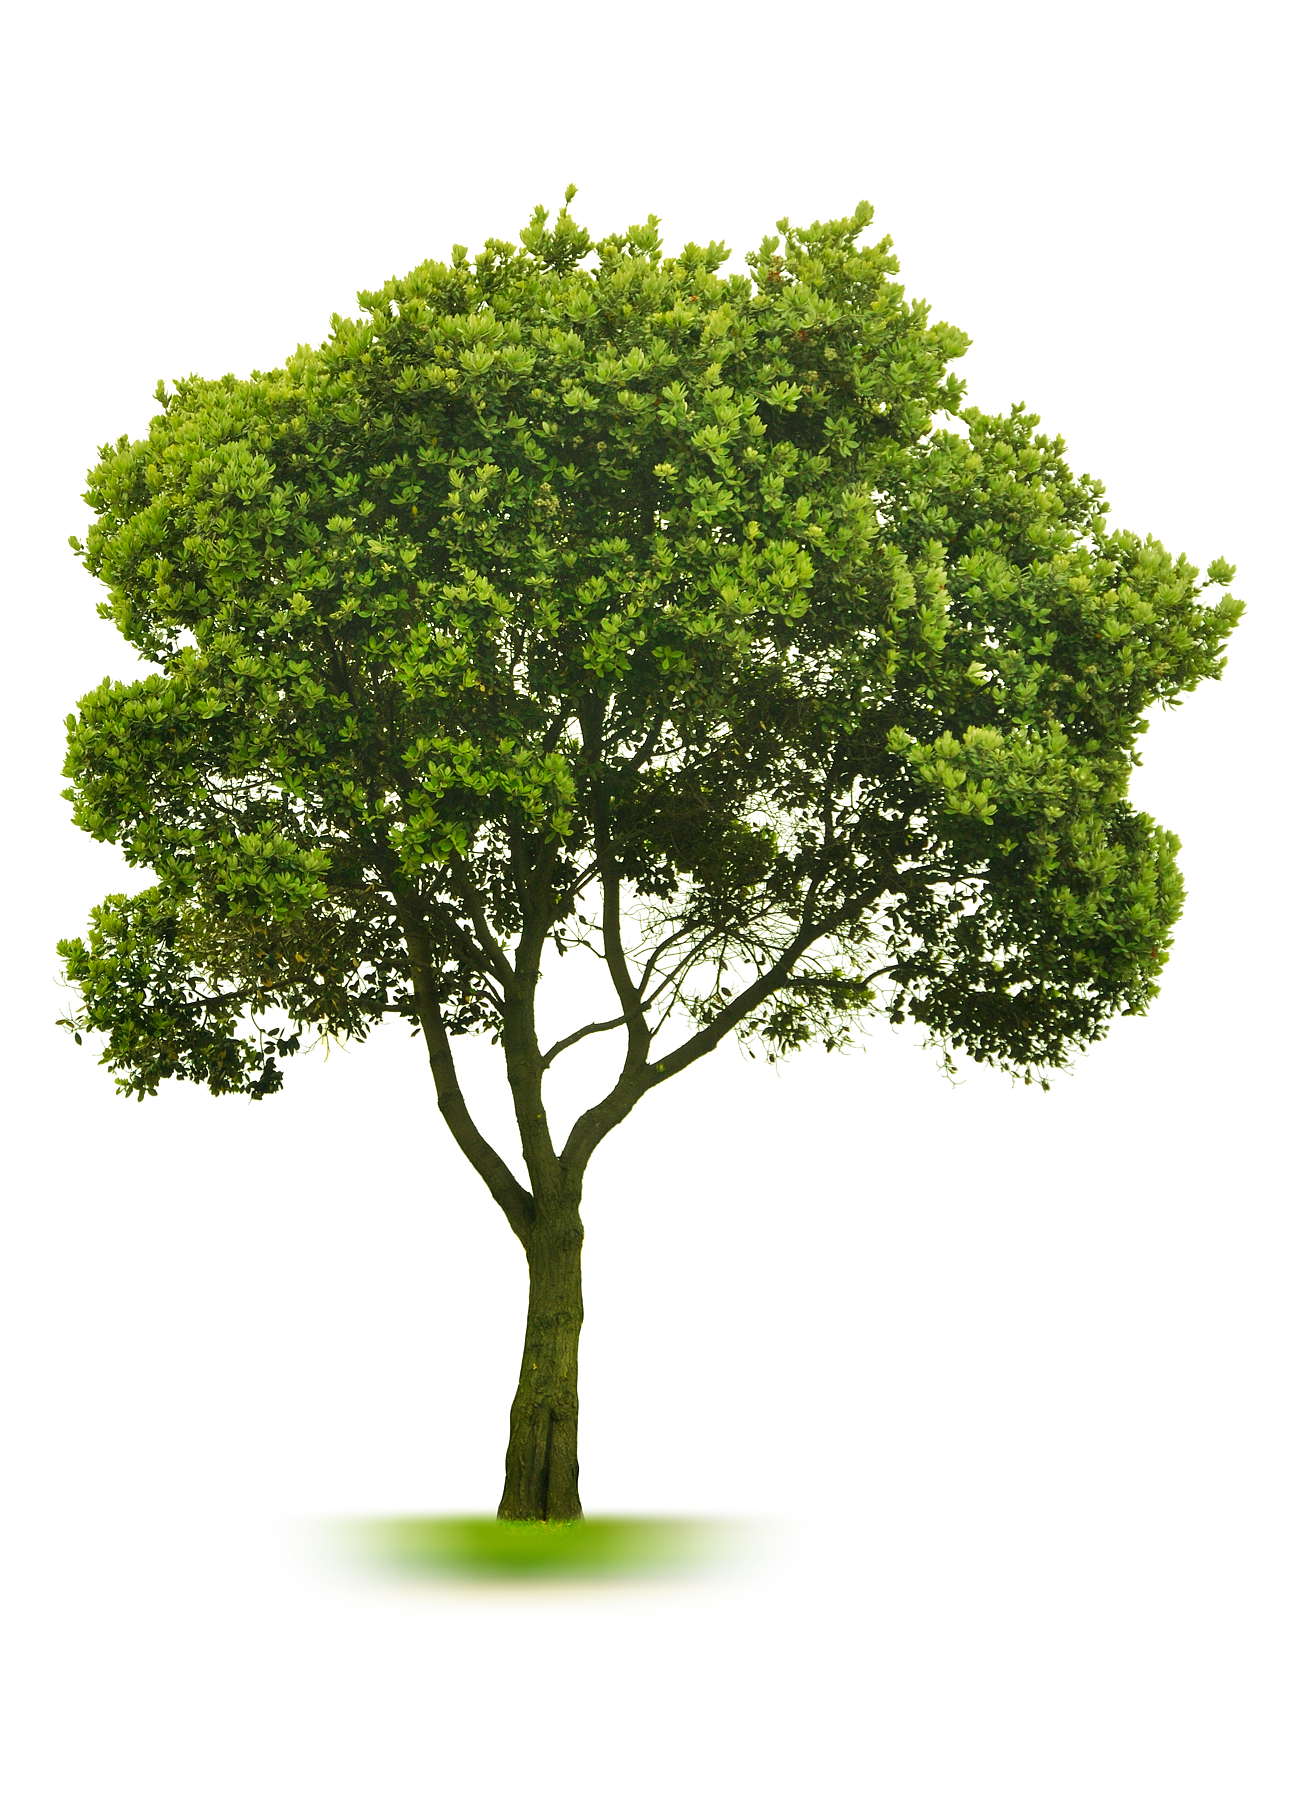 Download Tree | Free Images at Clker.com - vector clip art online, royalty free & public domain